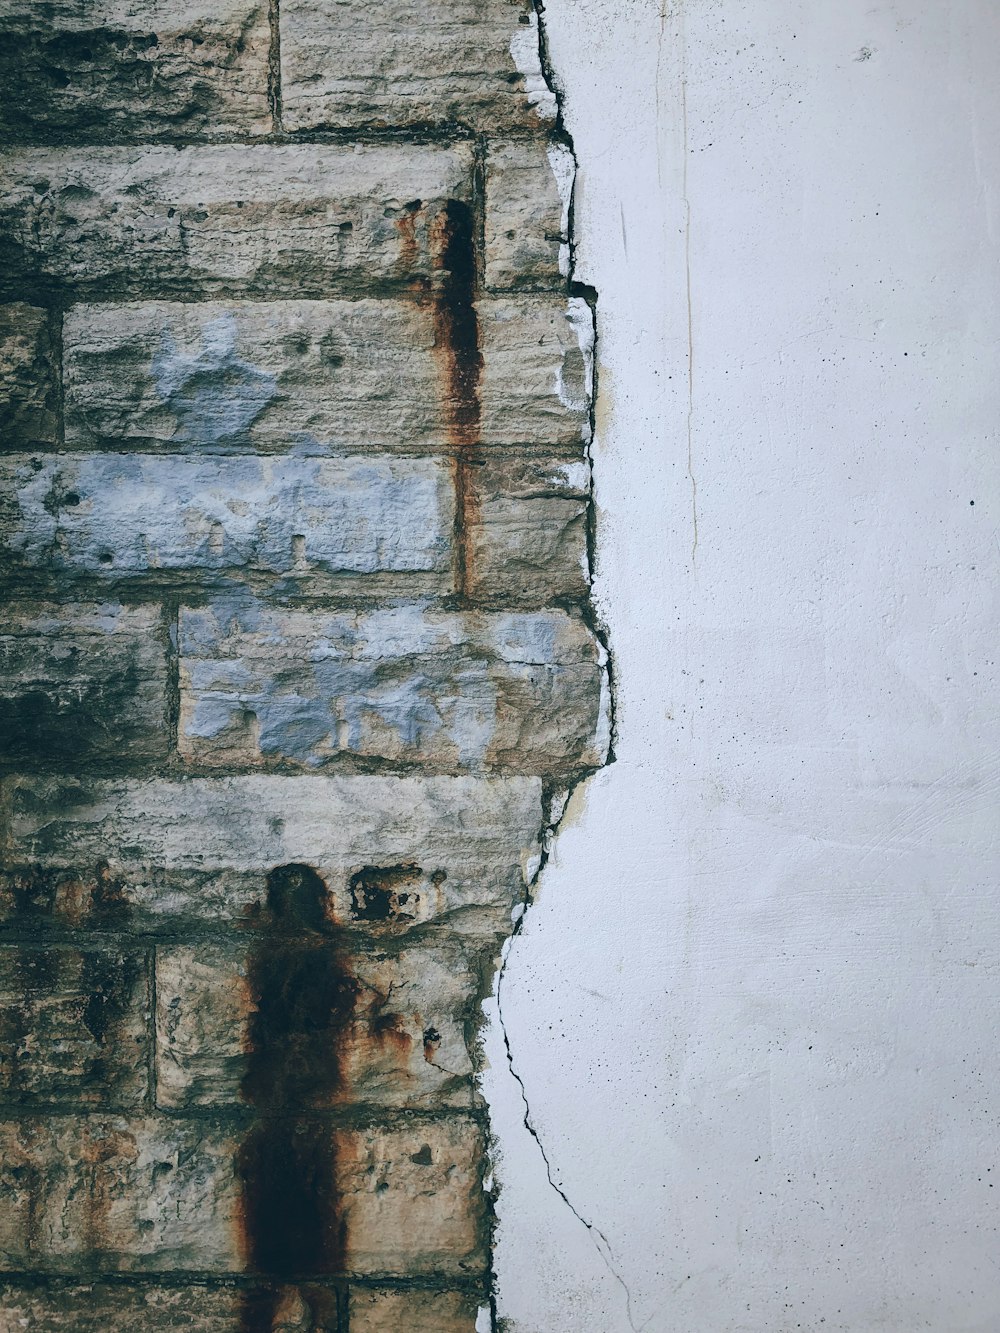 a person standing in front of a brick wall